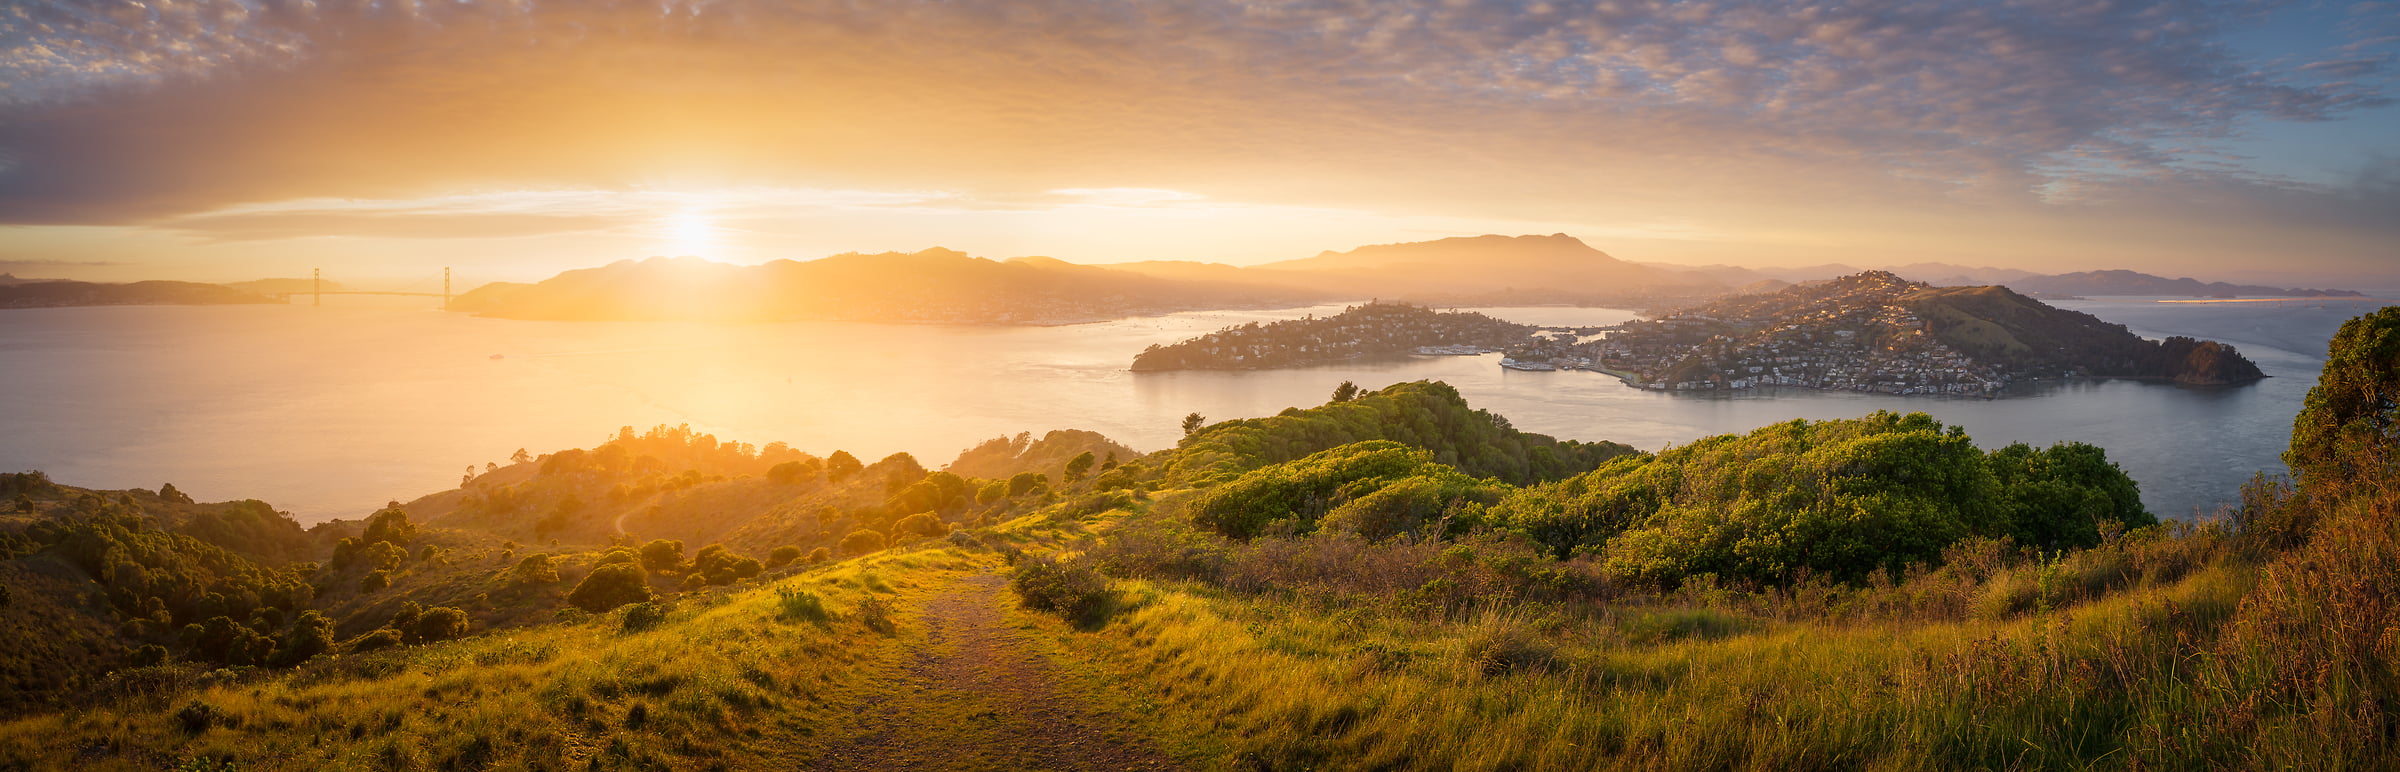 145 megapixels! A very high resolution, large-format VAST photo print of an inspirational pathway at sunset; landscape photograph created by Jeff Lewis in Marin County, California